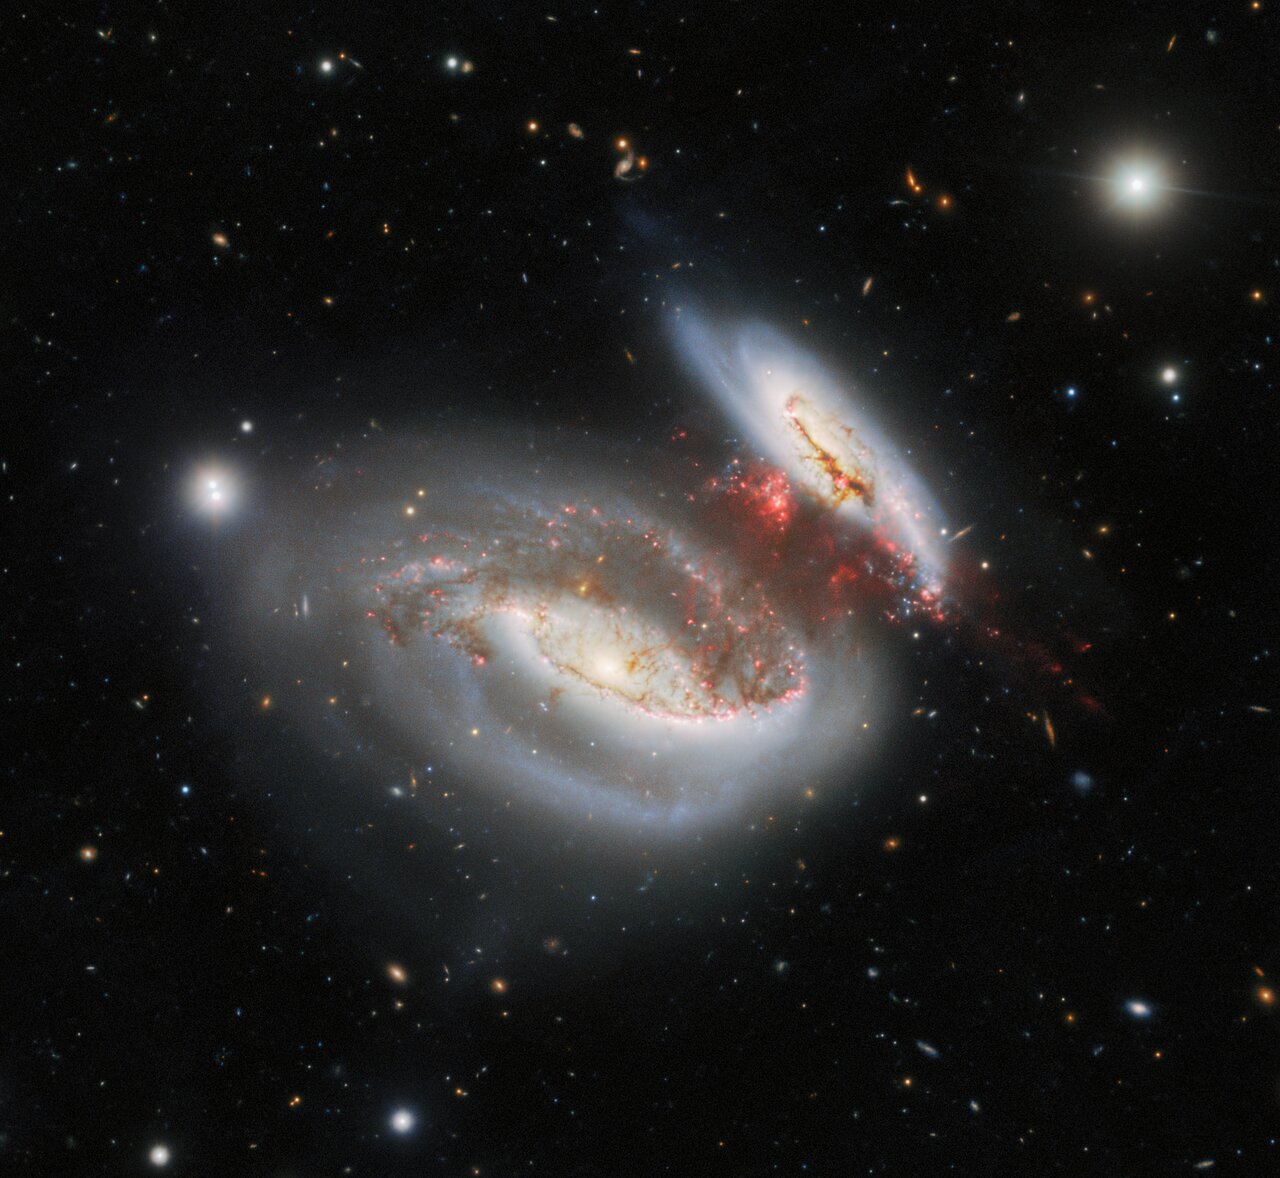 image of the so-called Taffy Galaxies — UGC 12914 and UGC 12915